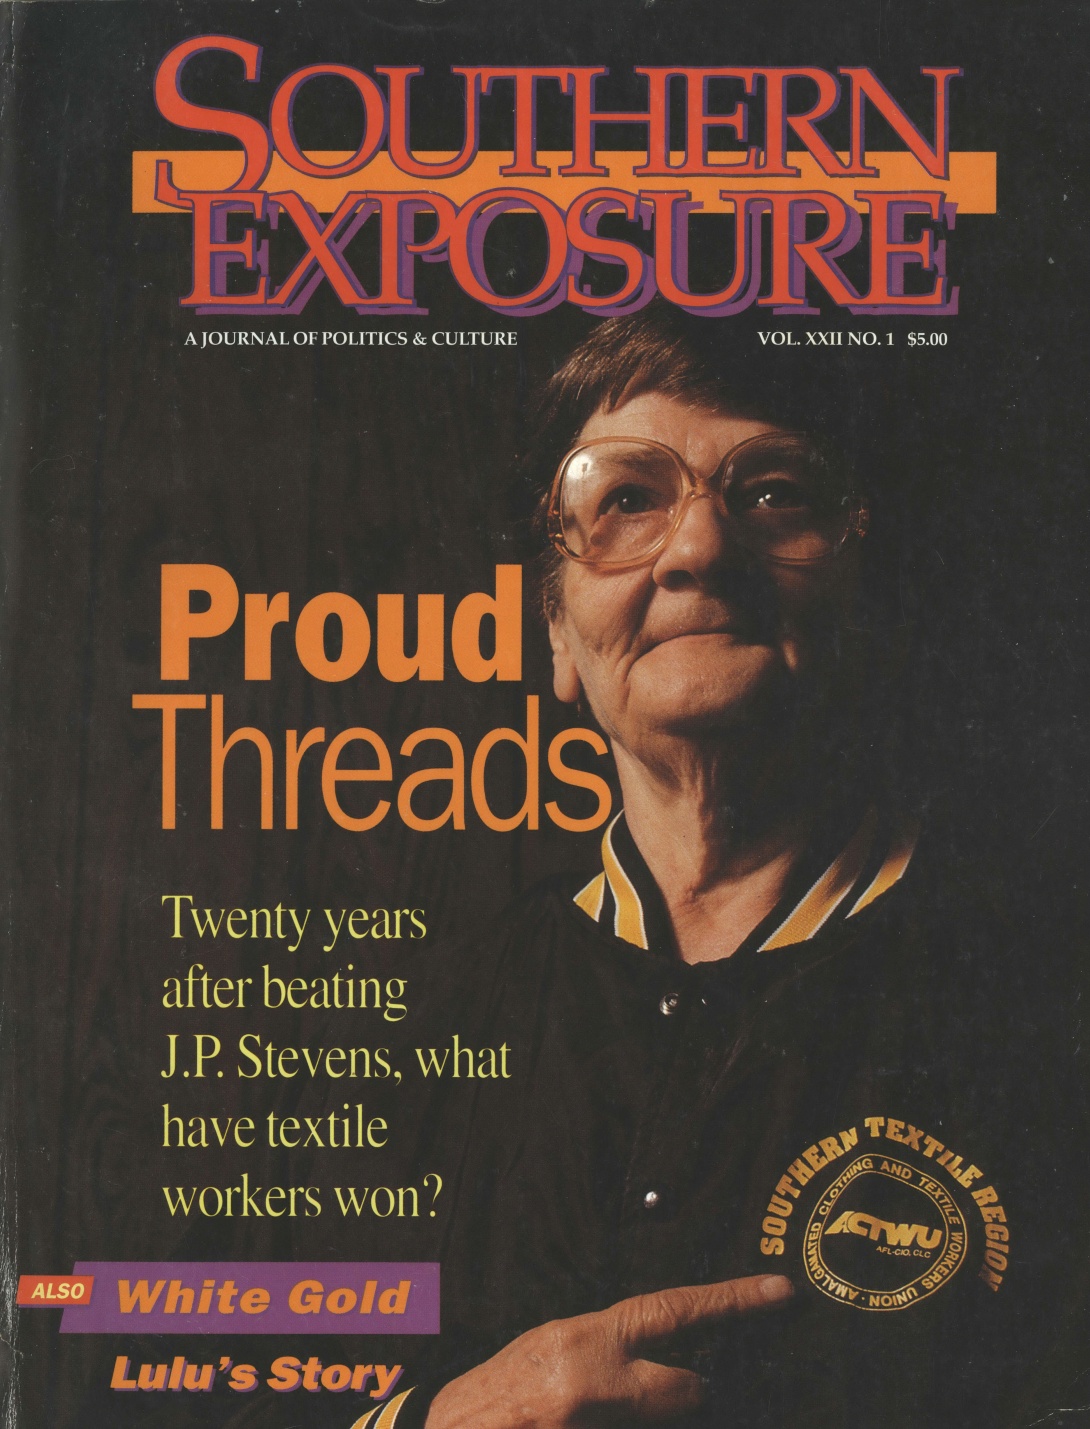 Magazine cover with photo of woman pointing to union logo on shirt, text reads "Proud Threads: Twenty years after beating JP Stevens, what have textile workers won?"